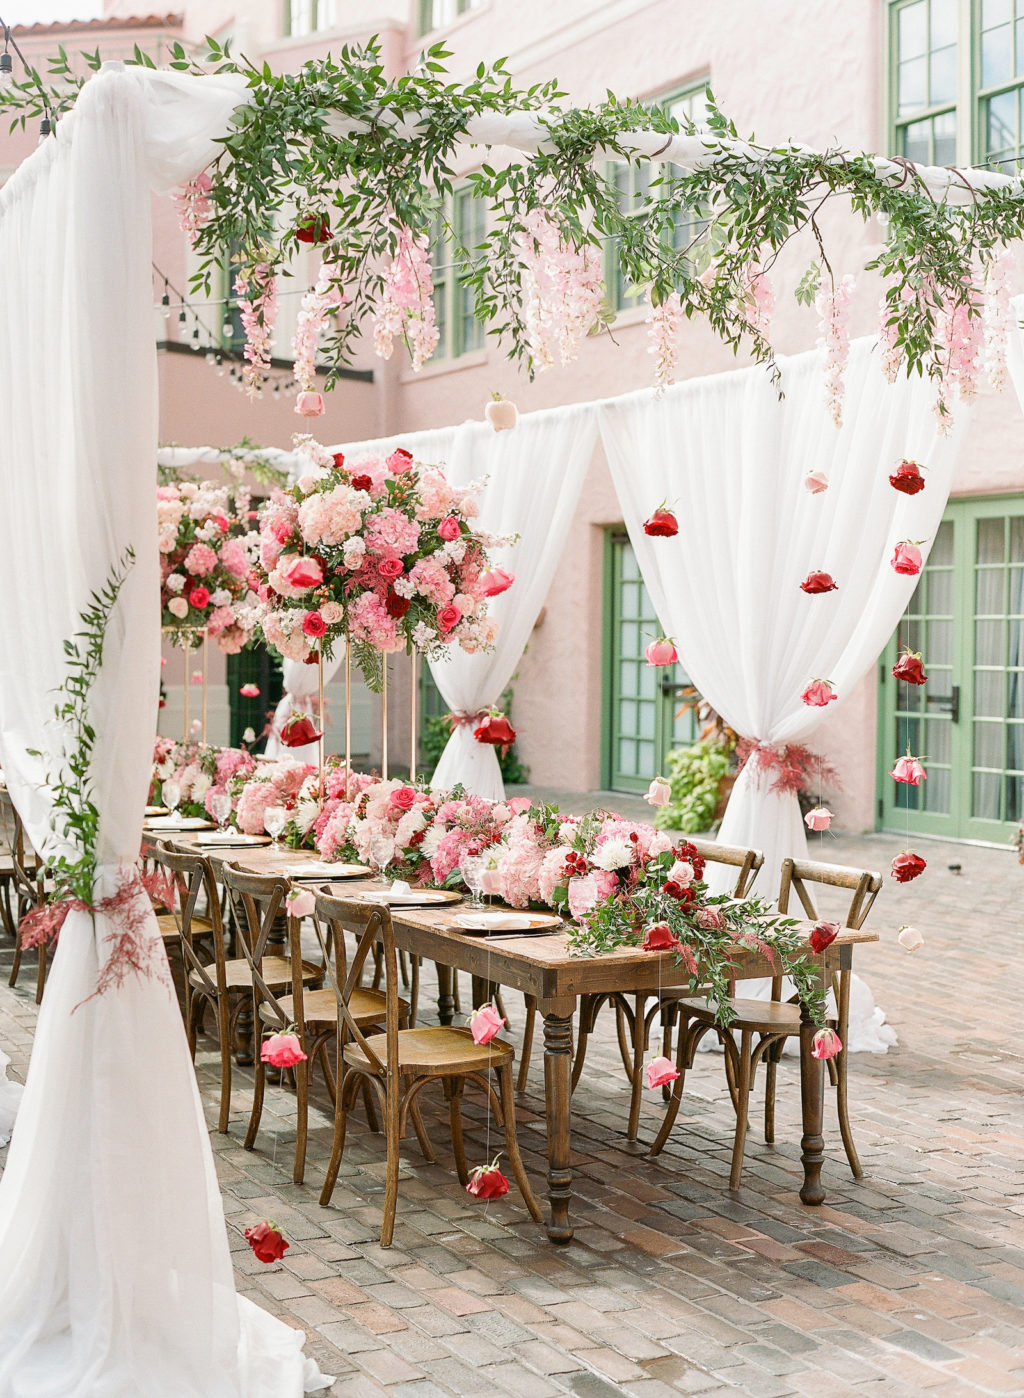 Elegant Garden Theme Wedding Reception Decor, White Drapery with Hanging Pink Flowers, Long Wooden Feasting Table with Wooden Cross Back Chairs, Tall Pink, Ivory and Red Floral Centerpiece | St. Pete Wedding Venue The Vinoy Renaissance